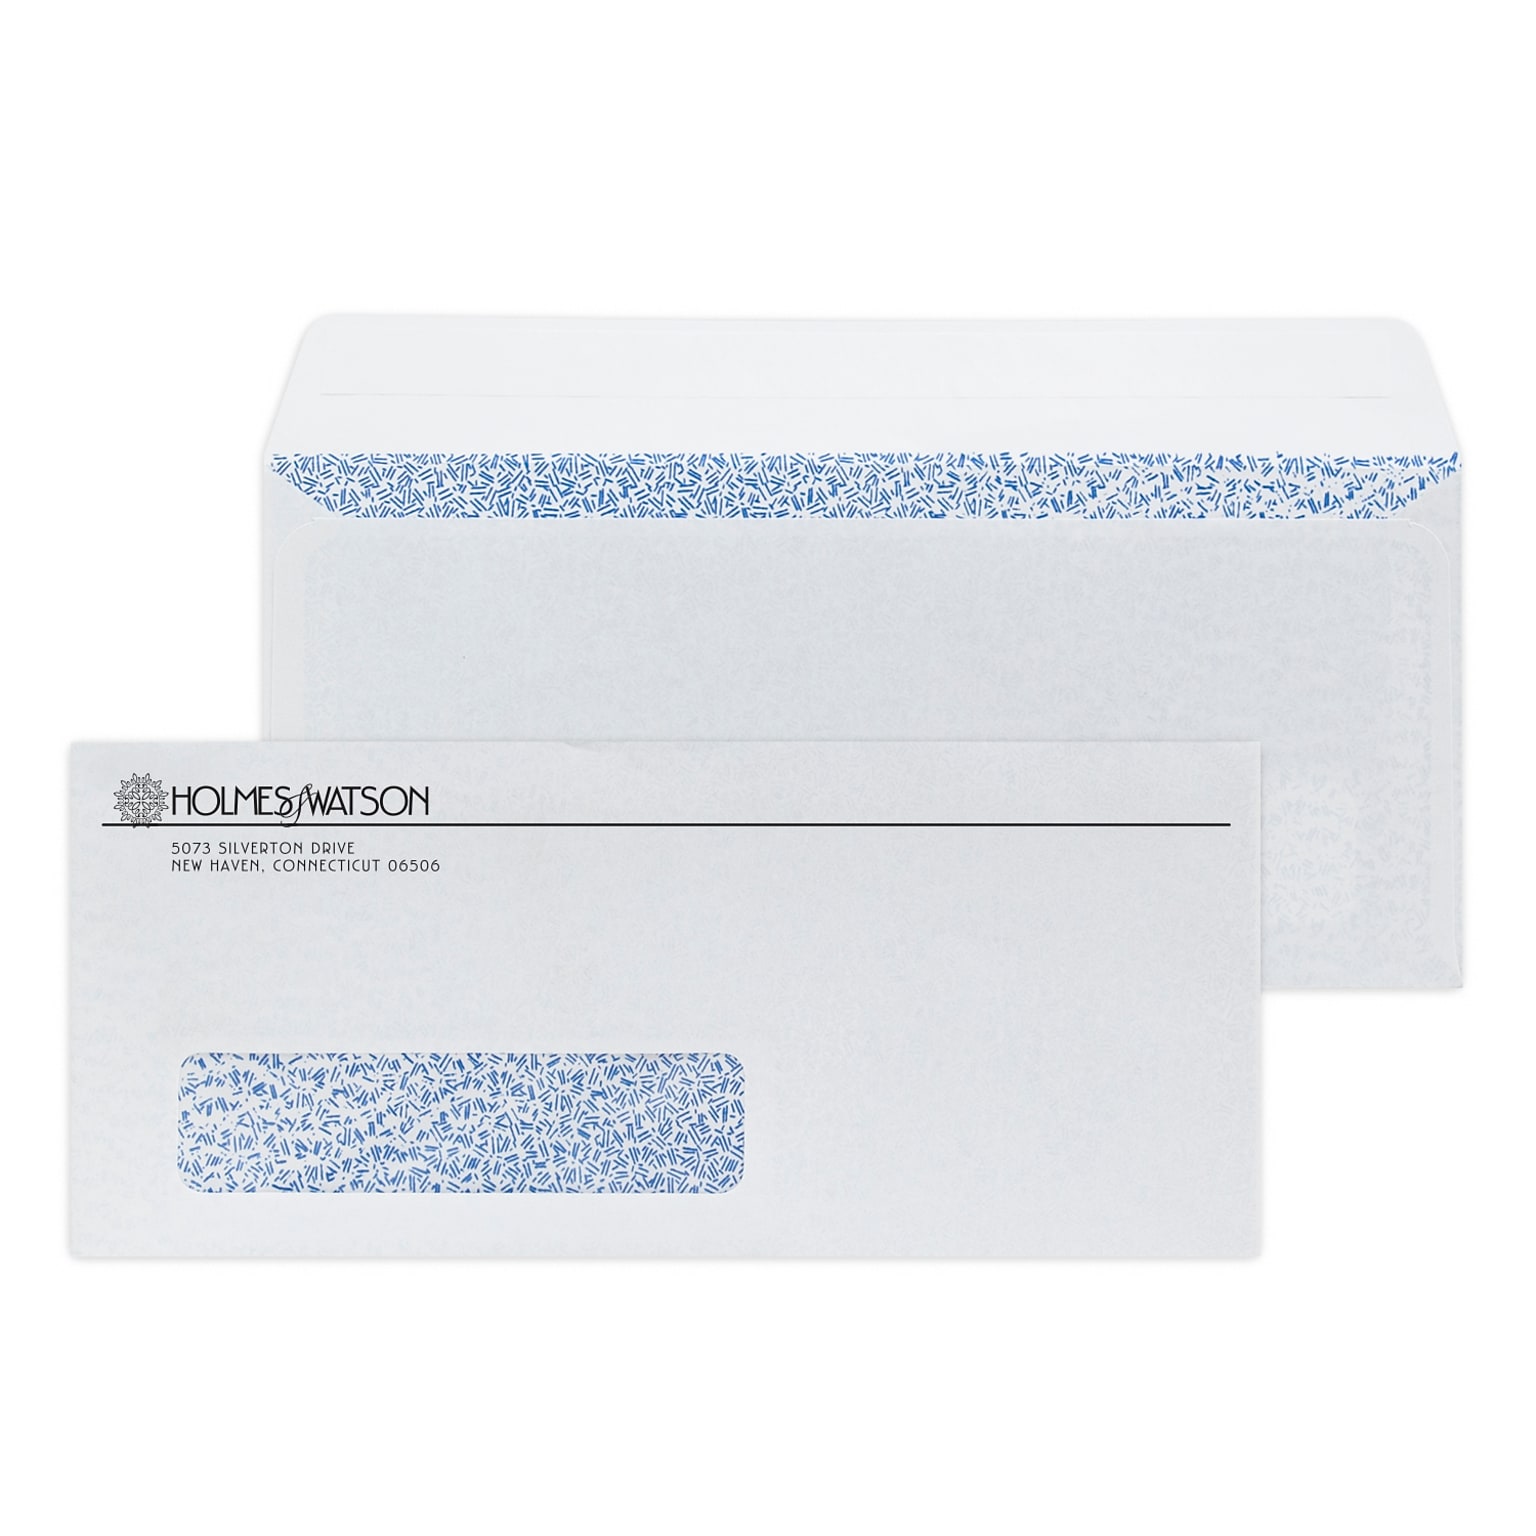 Custom #10 Barcode Peel and Seal Window Envelopes with Security Tint, 4 1/4 x 9 1/2, 24# White Wove, 1 Standard Ink, 250/Pack